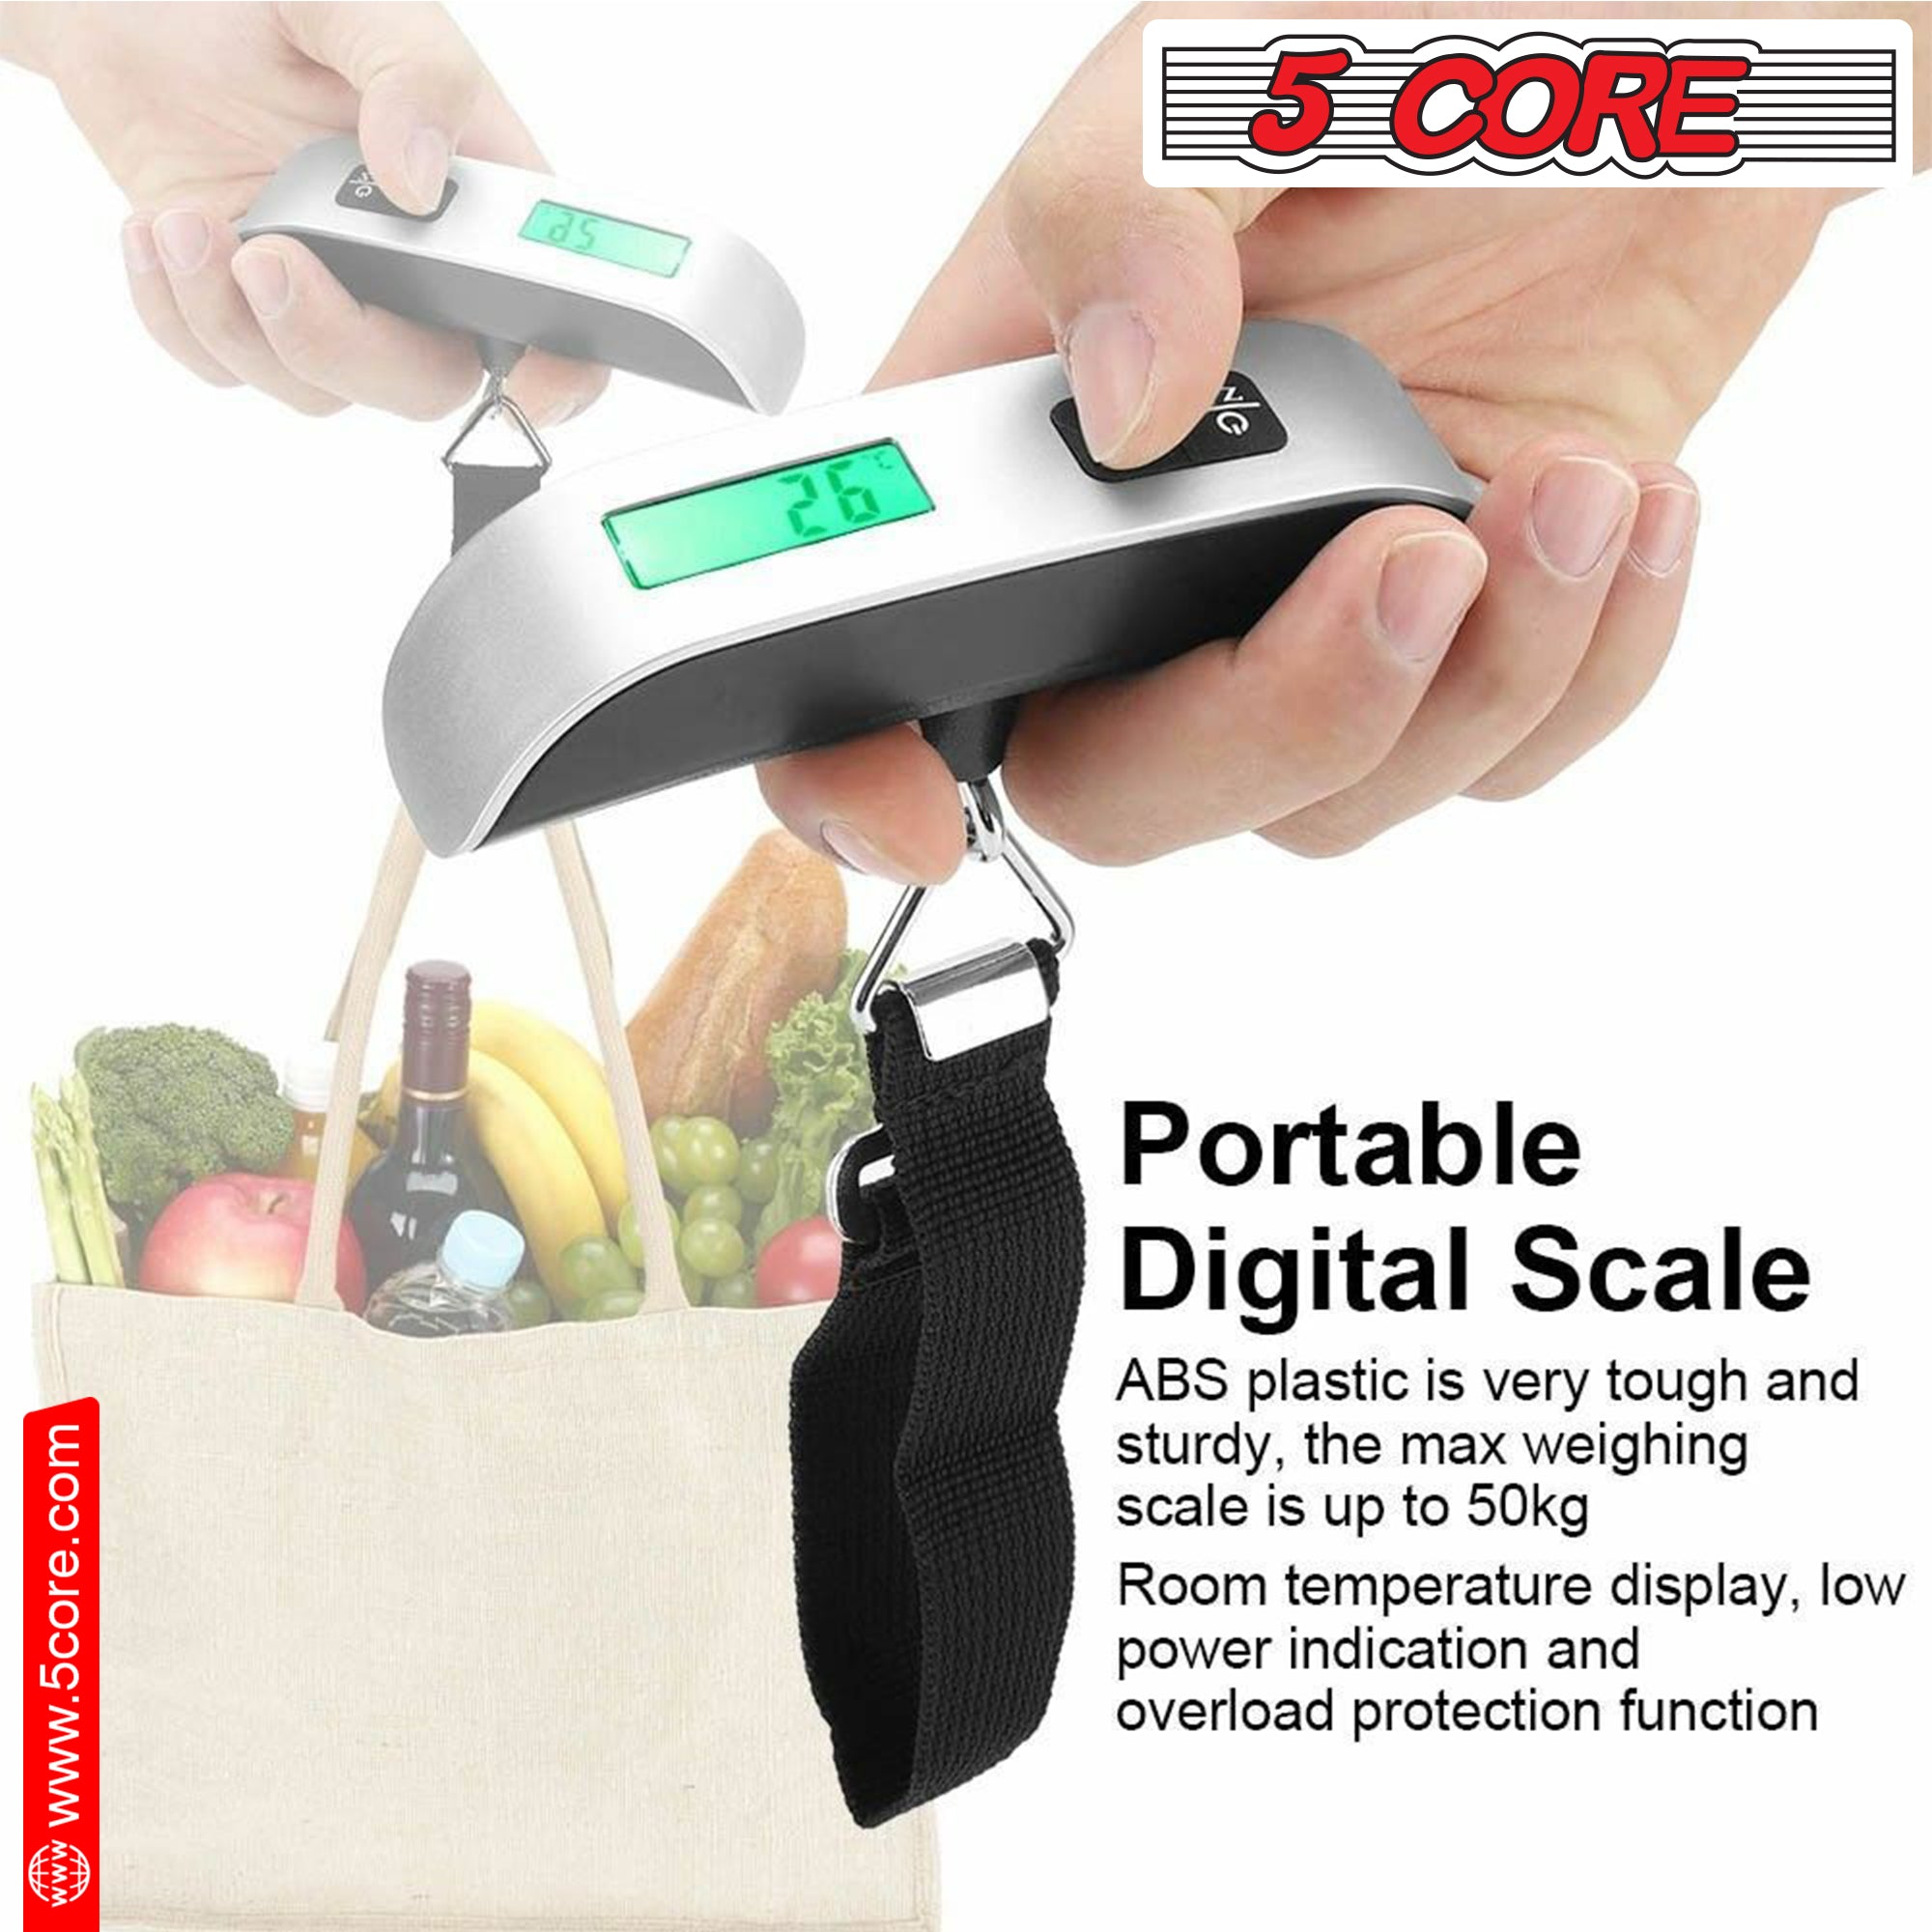 Fosmon Digital Luggage Scale, 110 LB Stainless Steel Hanging Handheld  Travel Scale with Tare Function - Silver